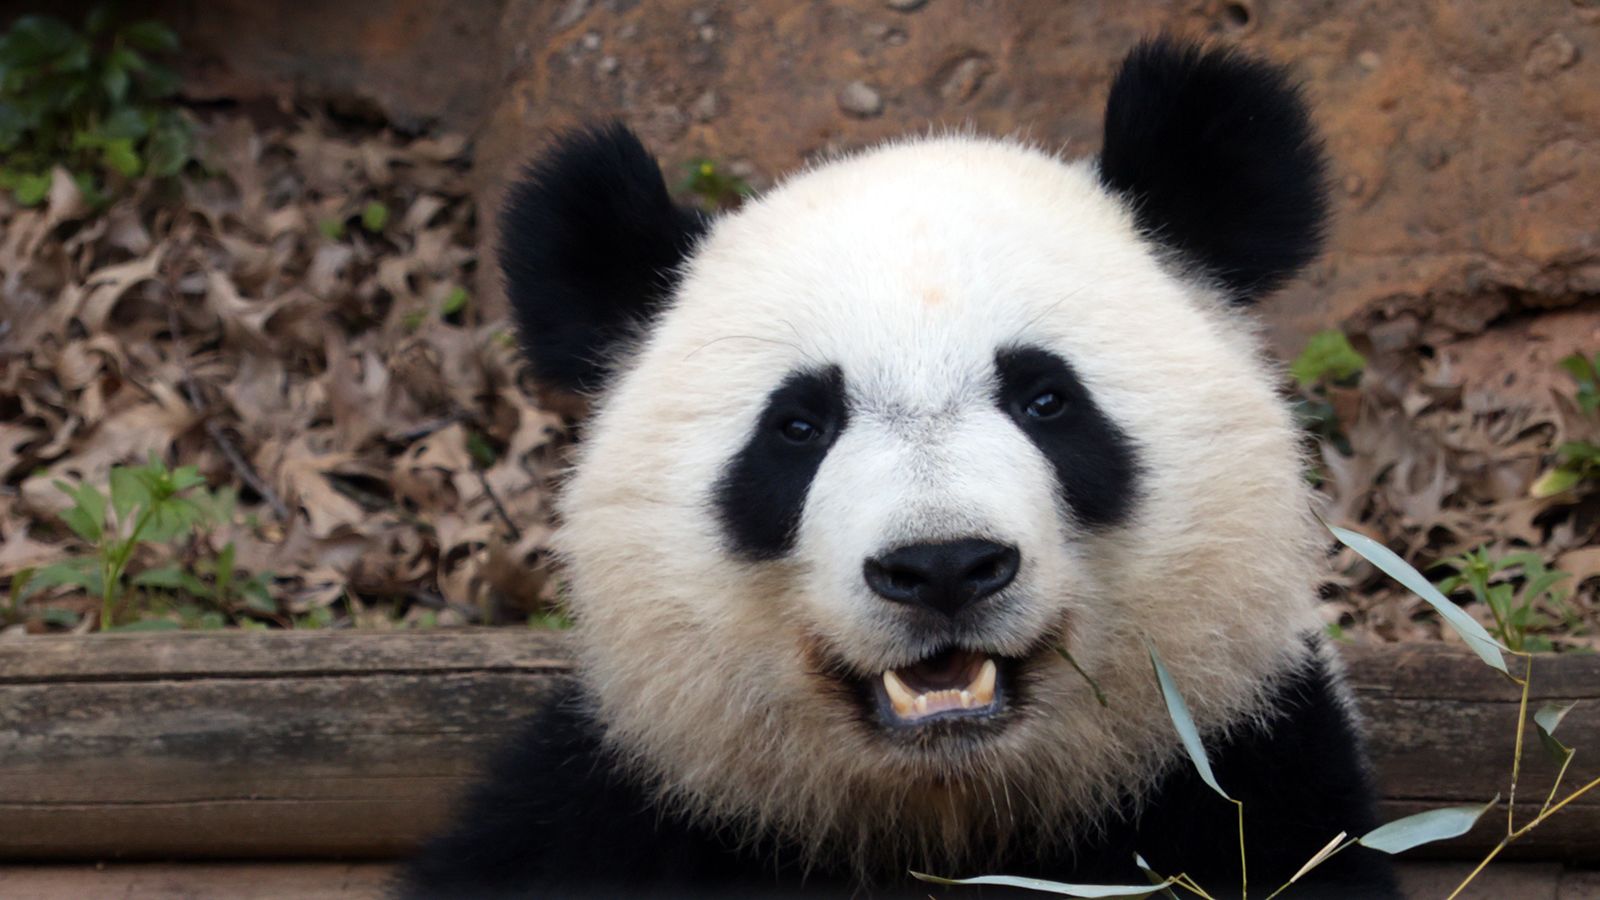 Pandas: A zoo's mission to help save them | CNN